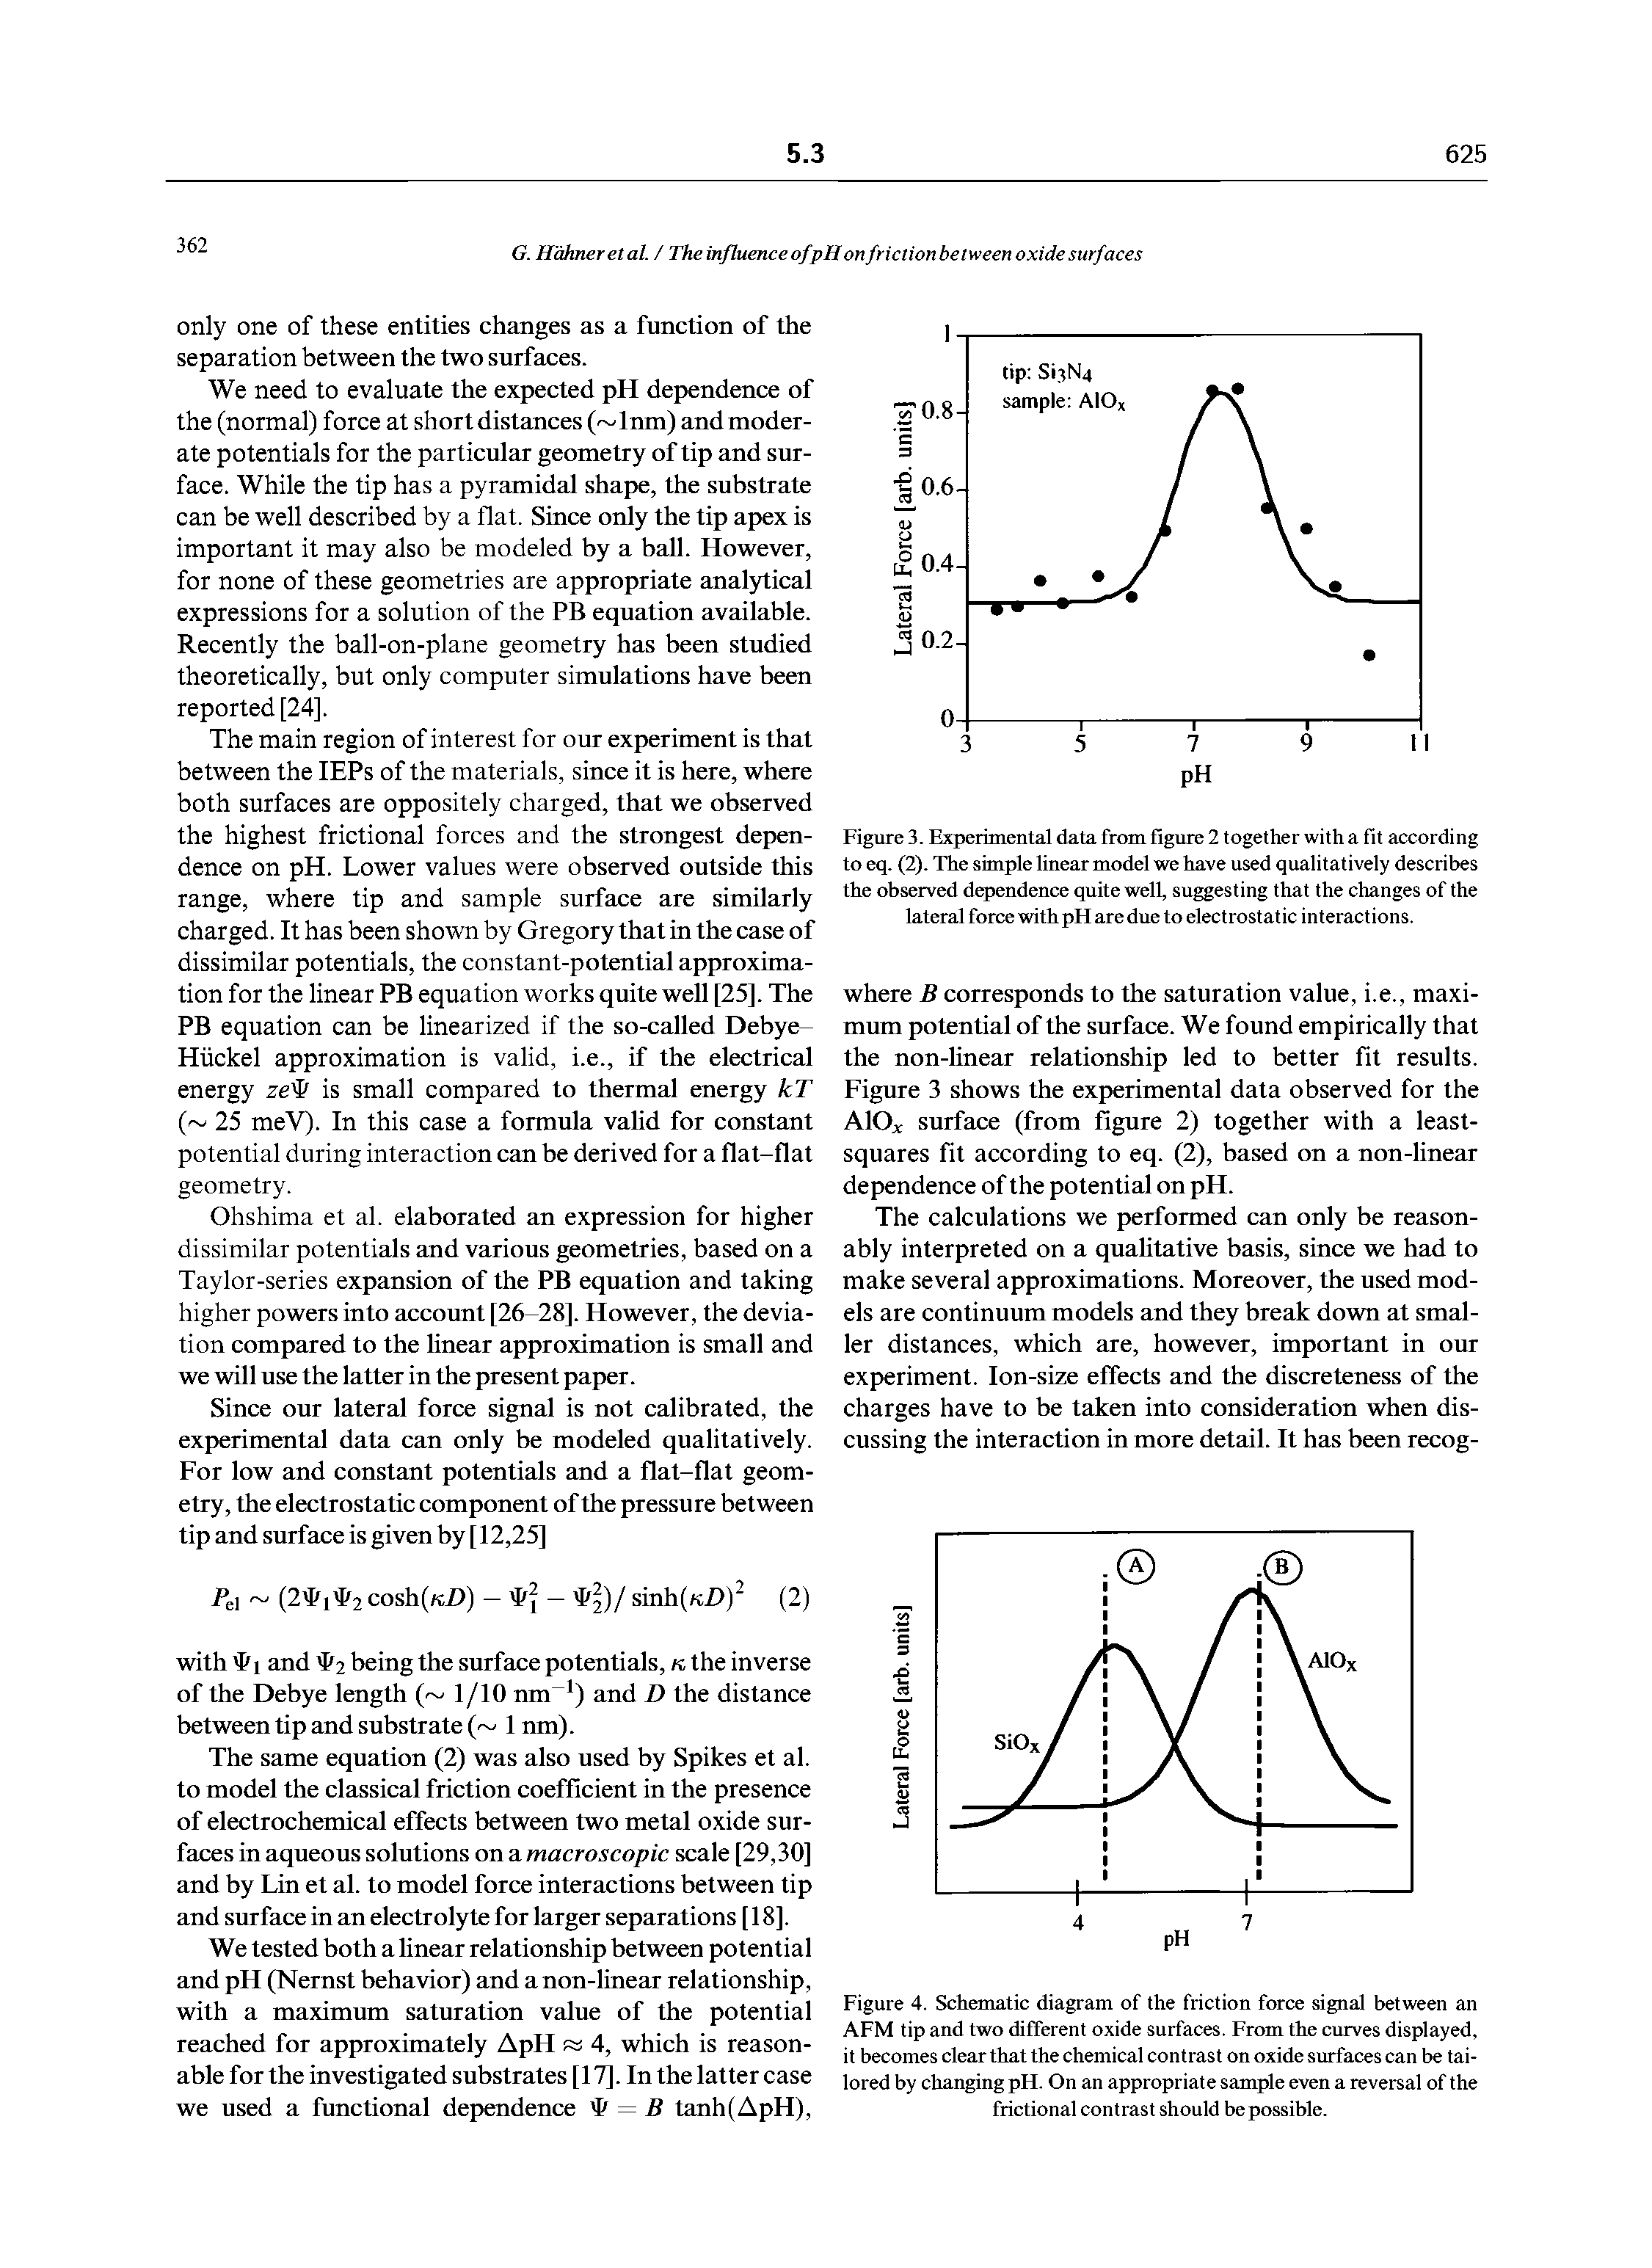 Figure 4. Schematic diagram of the friction force signal between an AFM tip and two different oxide surfaces. From the curves displayed, it becomes clear that the chemical contrast on oxide surfaces can be tailored by changing pH. On an appropriate sample even a reversal of the frictional contrast should be possible.